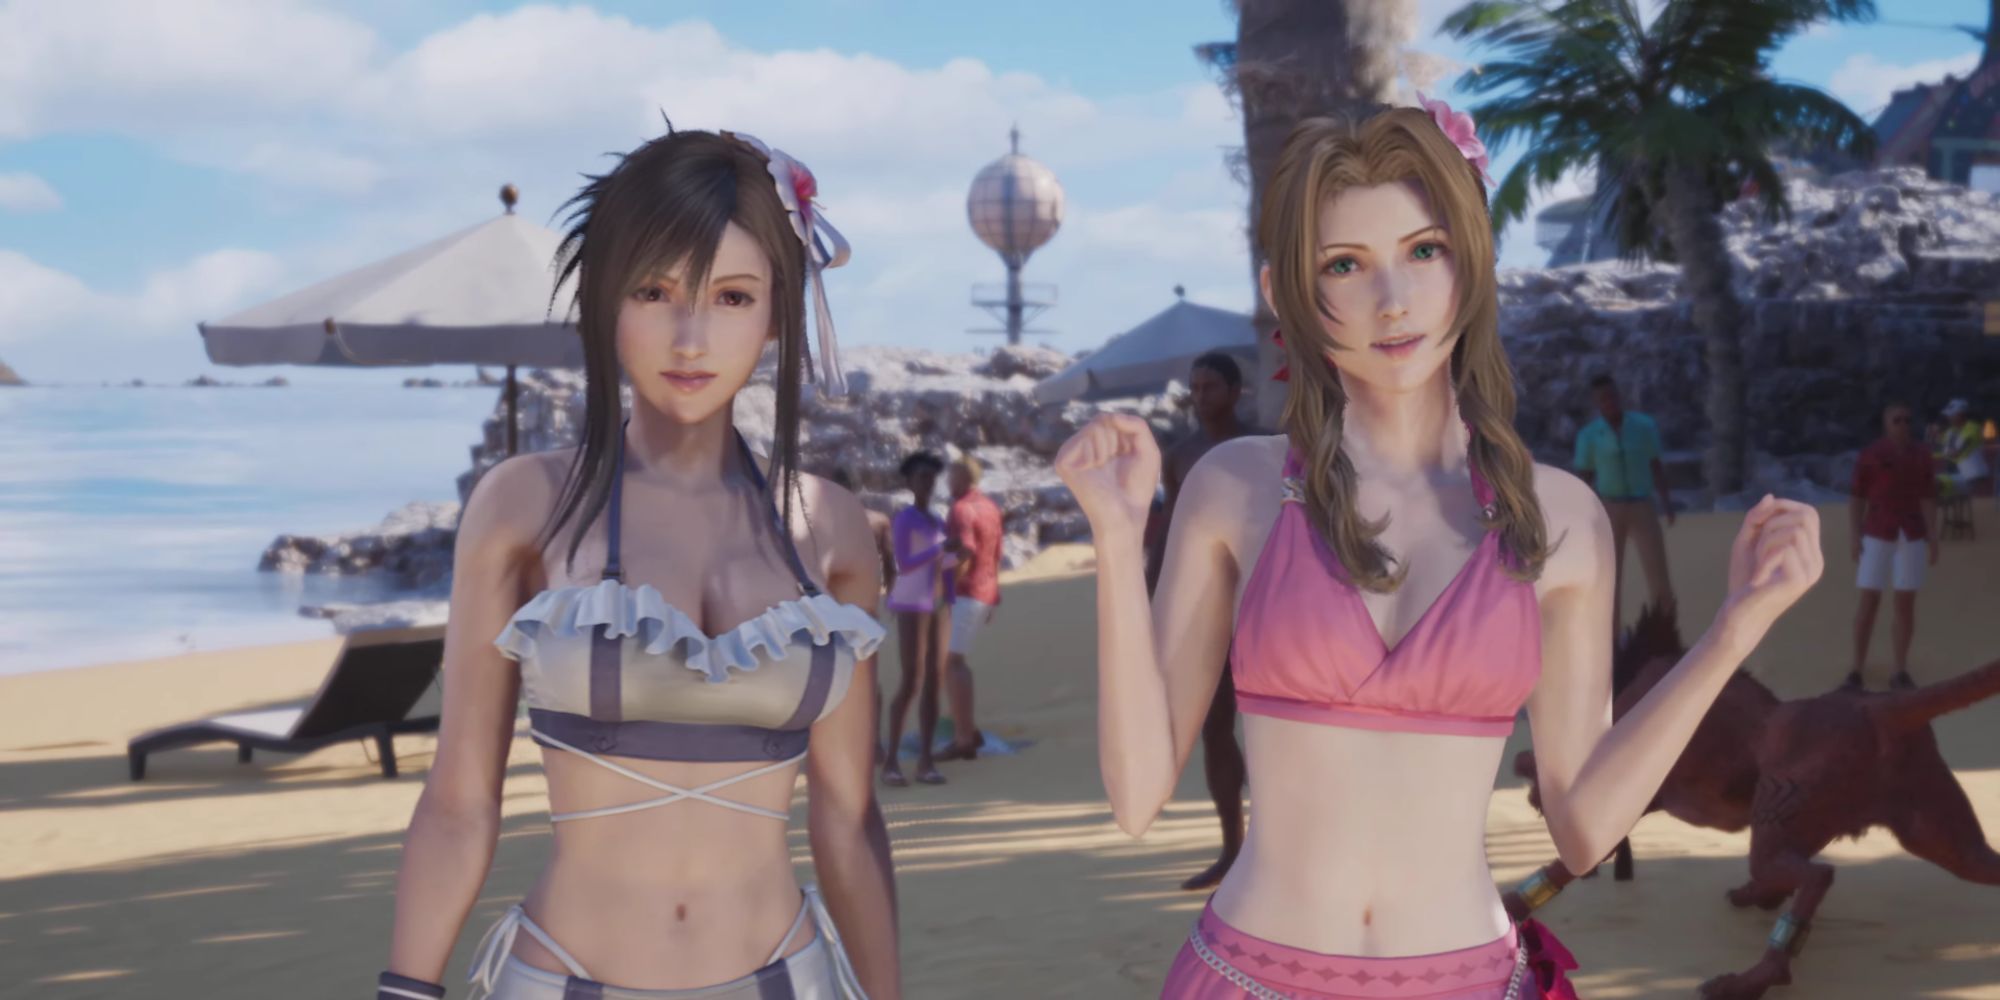 Tifa and Aerith in their Costa Del Sol swimsuits.